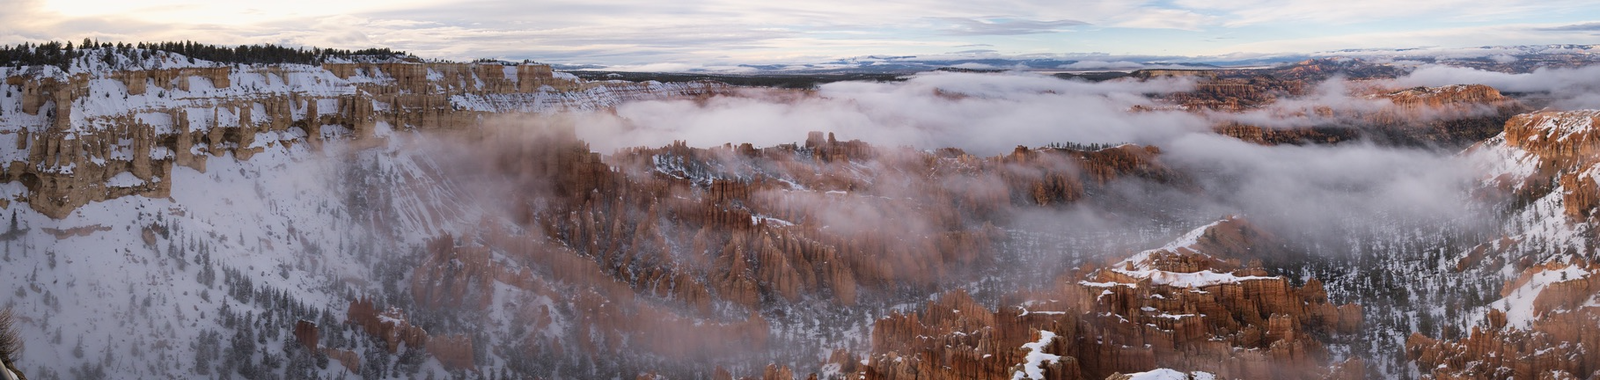 Image of Inspiration Point - Bryce Canyon NP by Steve West